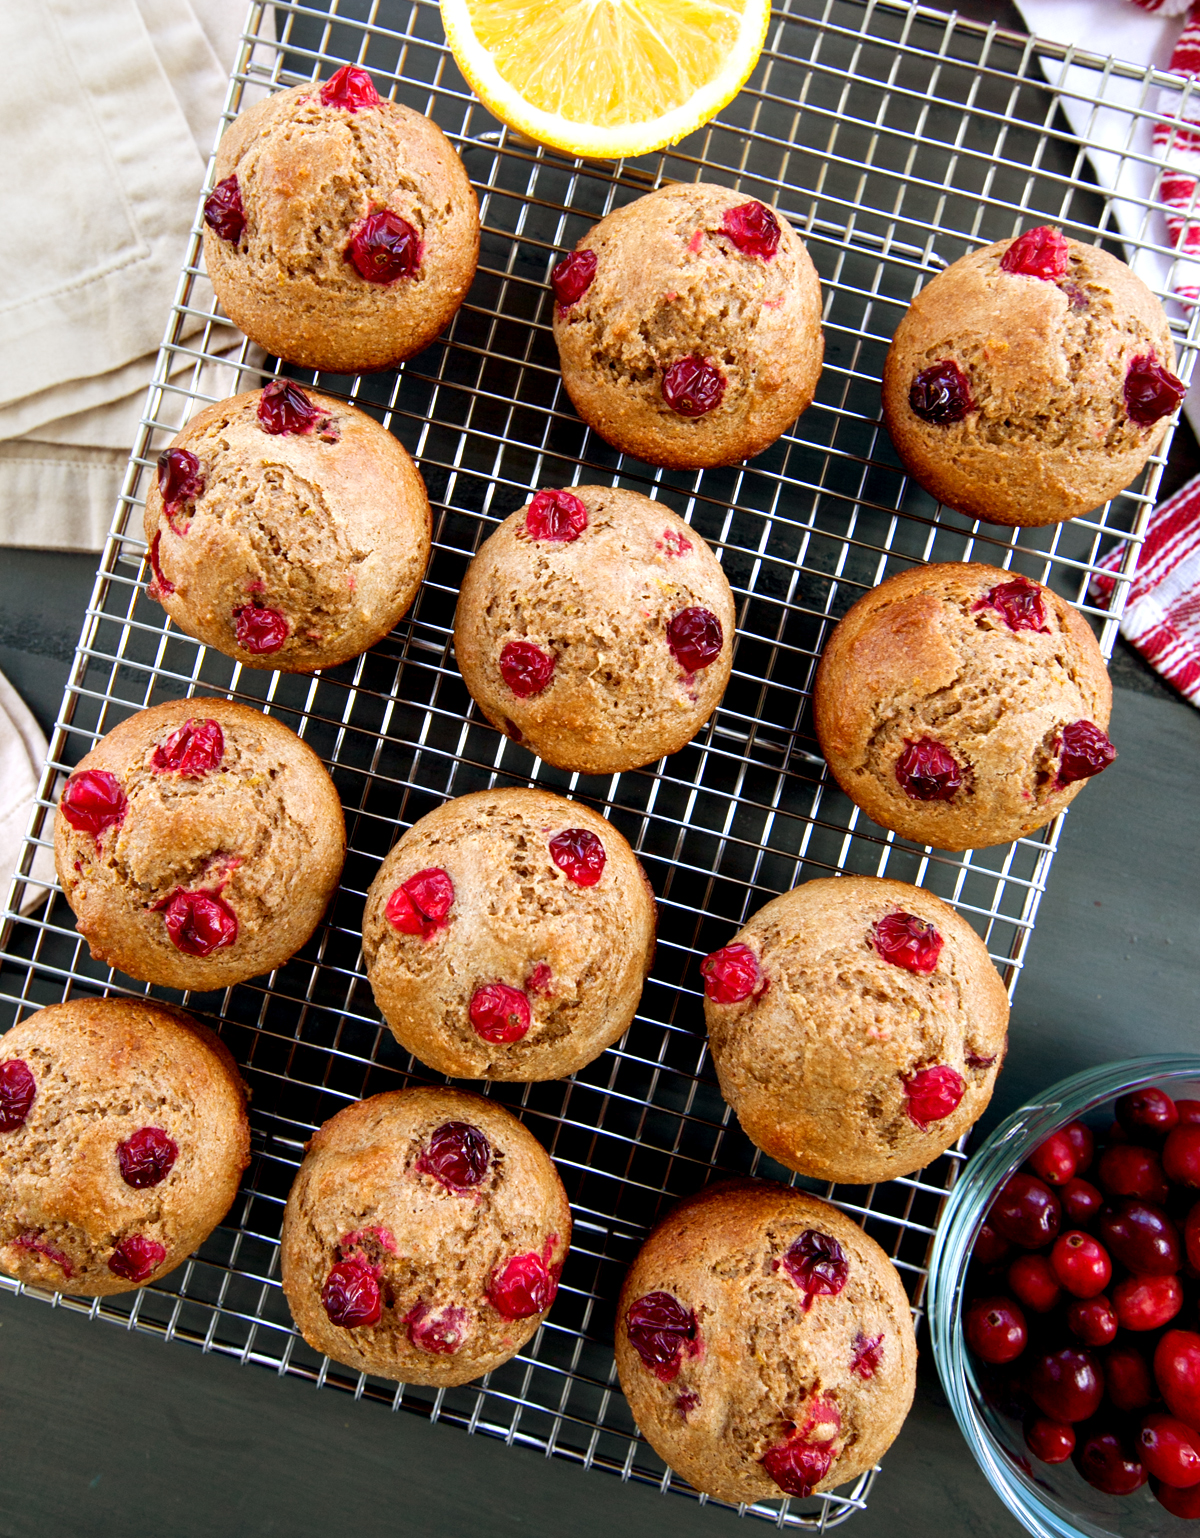 An overhead view of fresh baked healthy cranberry orange muffins